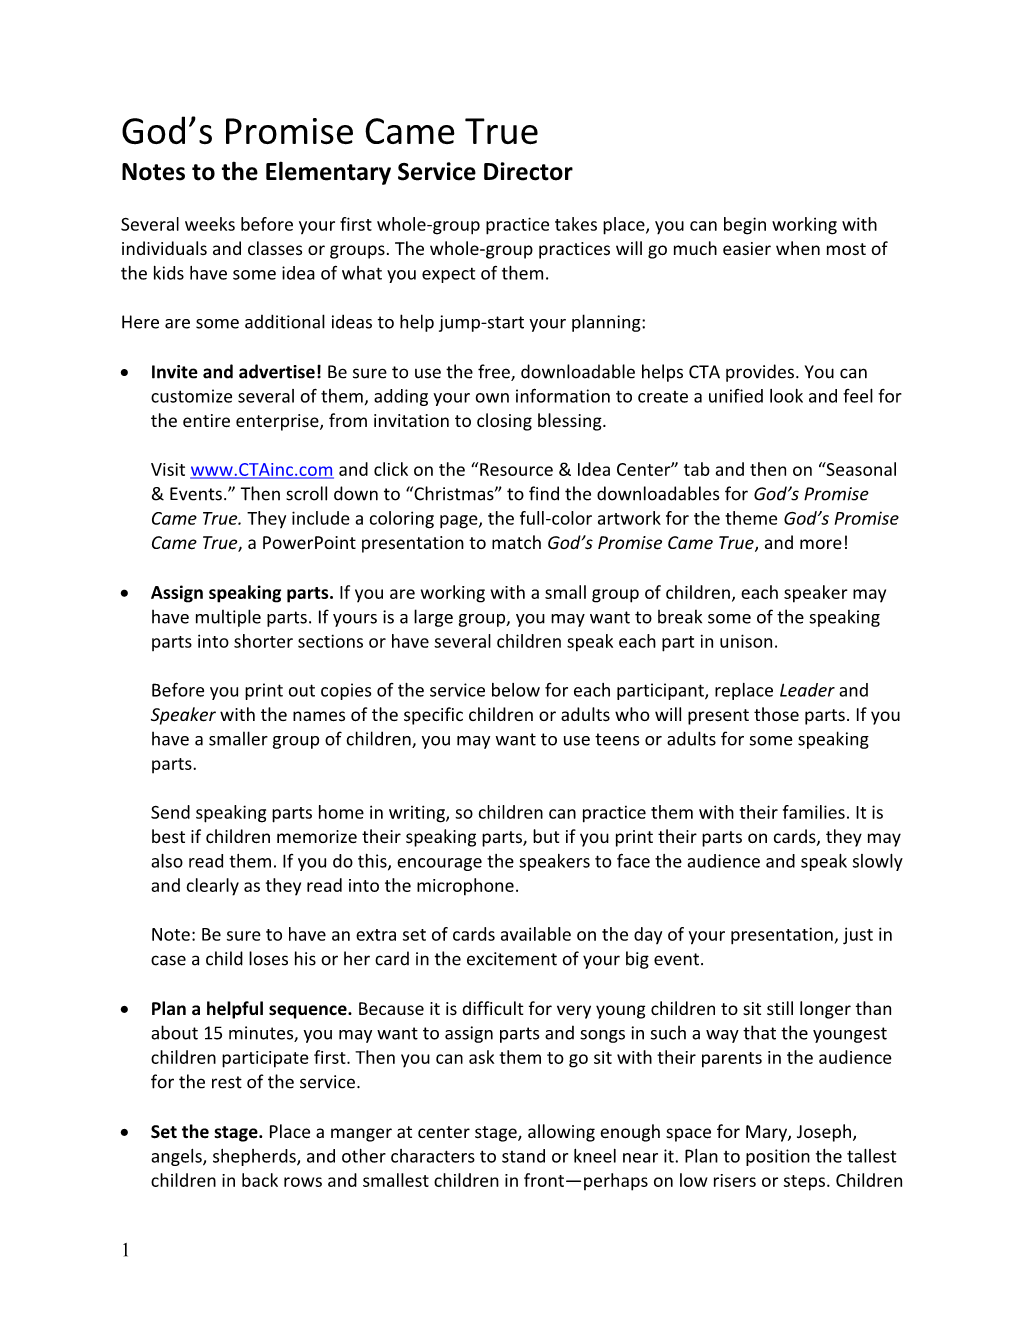 Notes to the Elementary Service Director